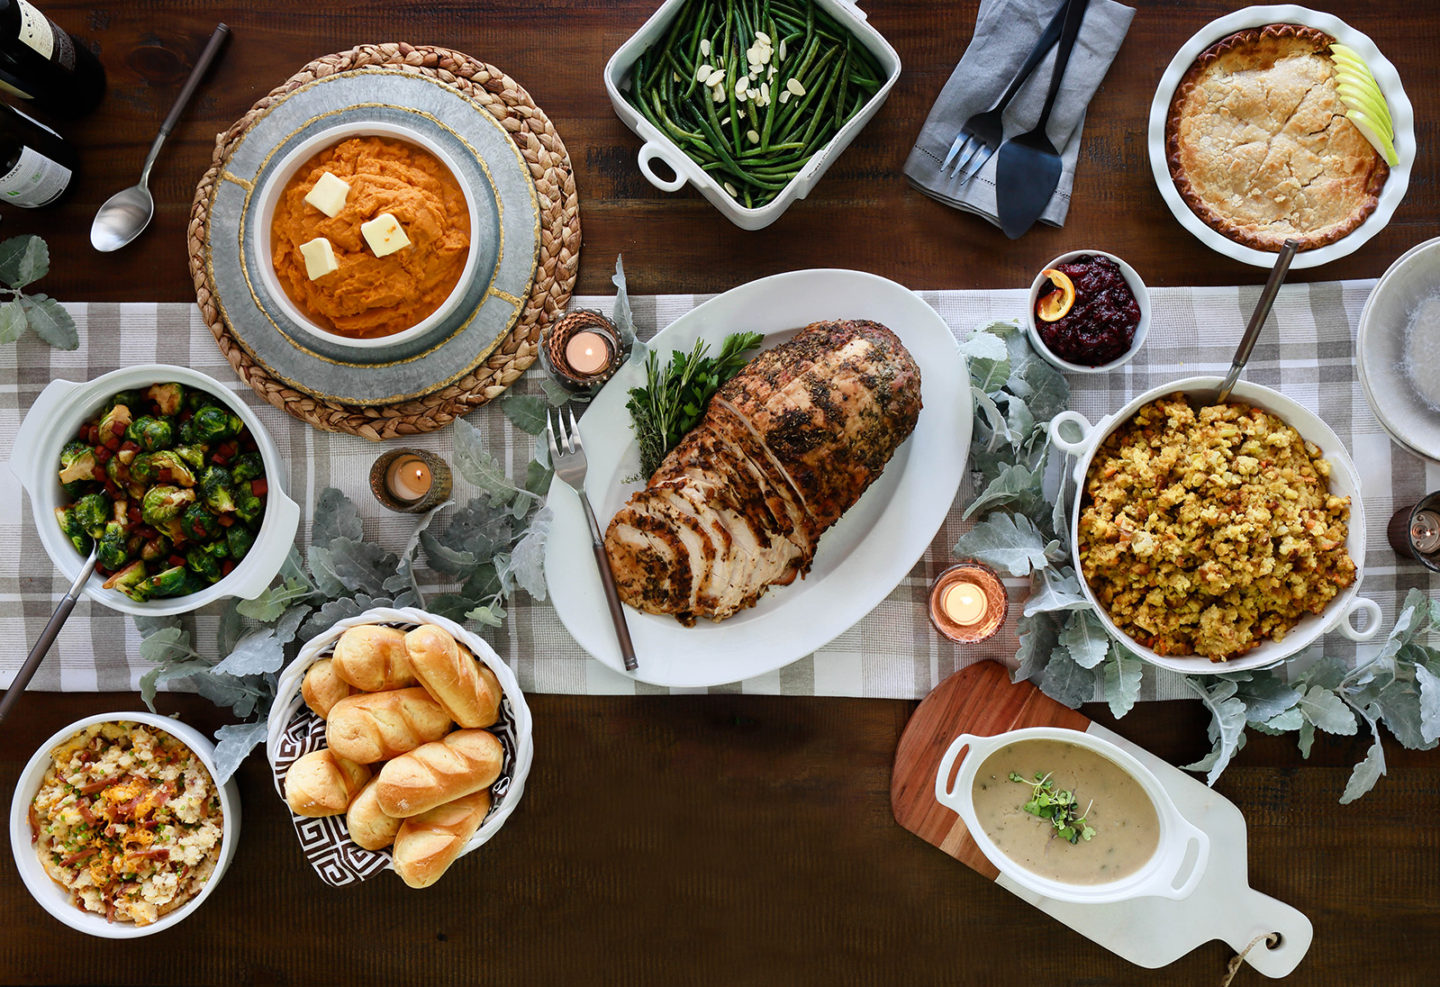 Where to Eat Thanksgiving in the City